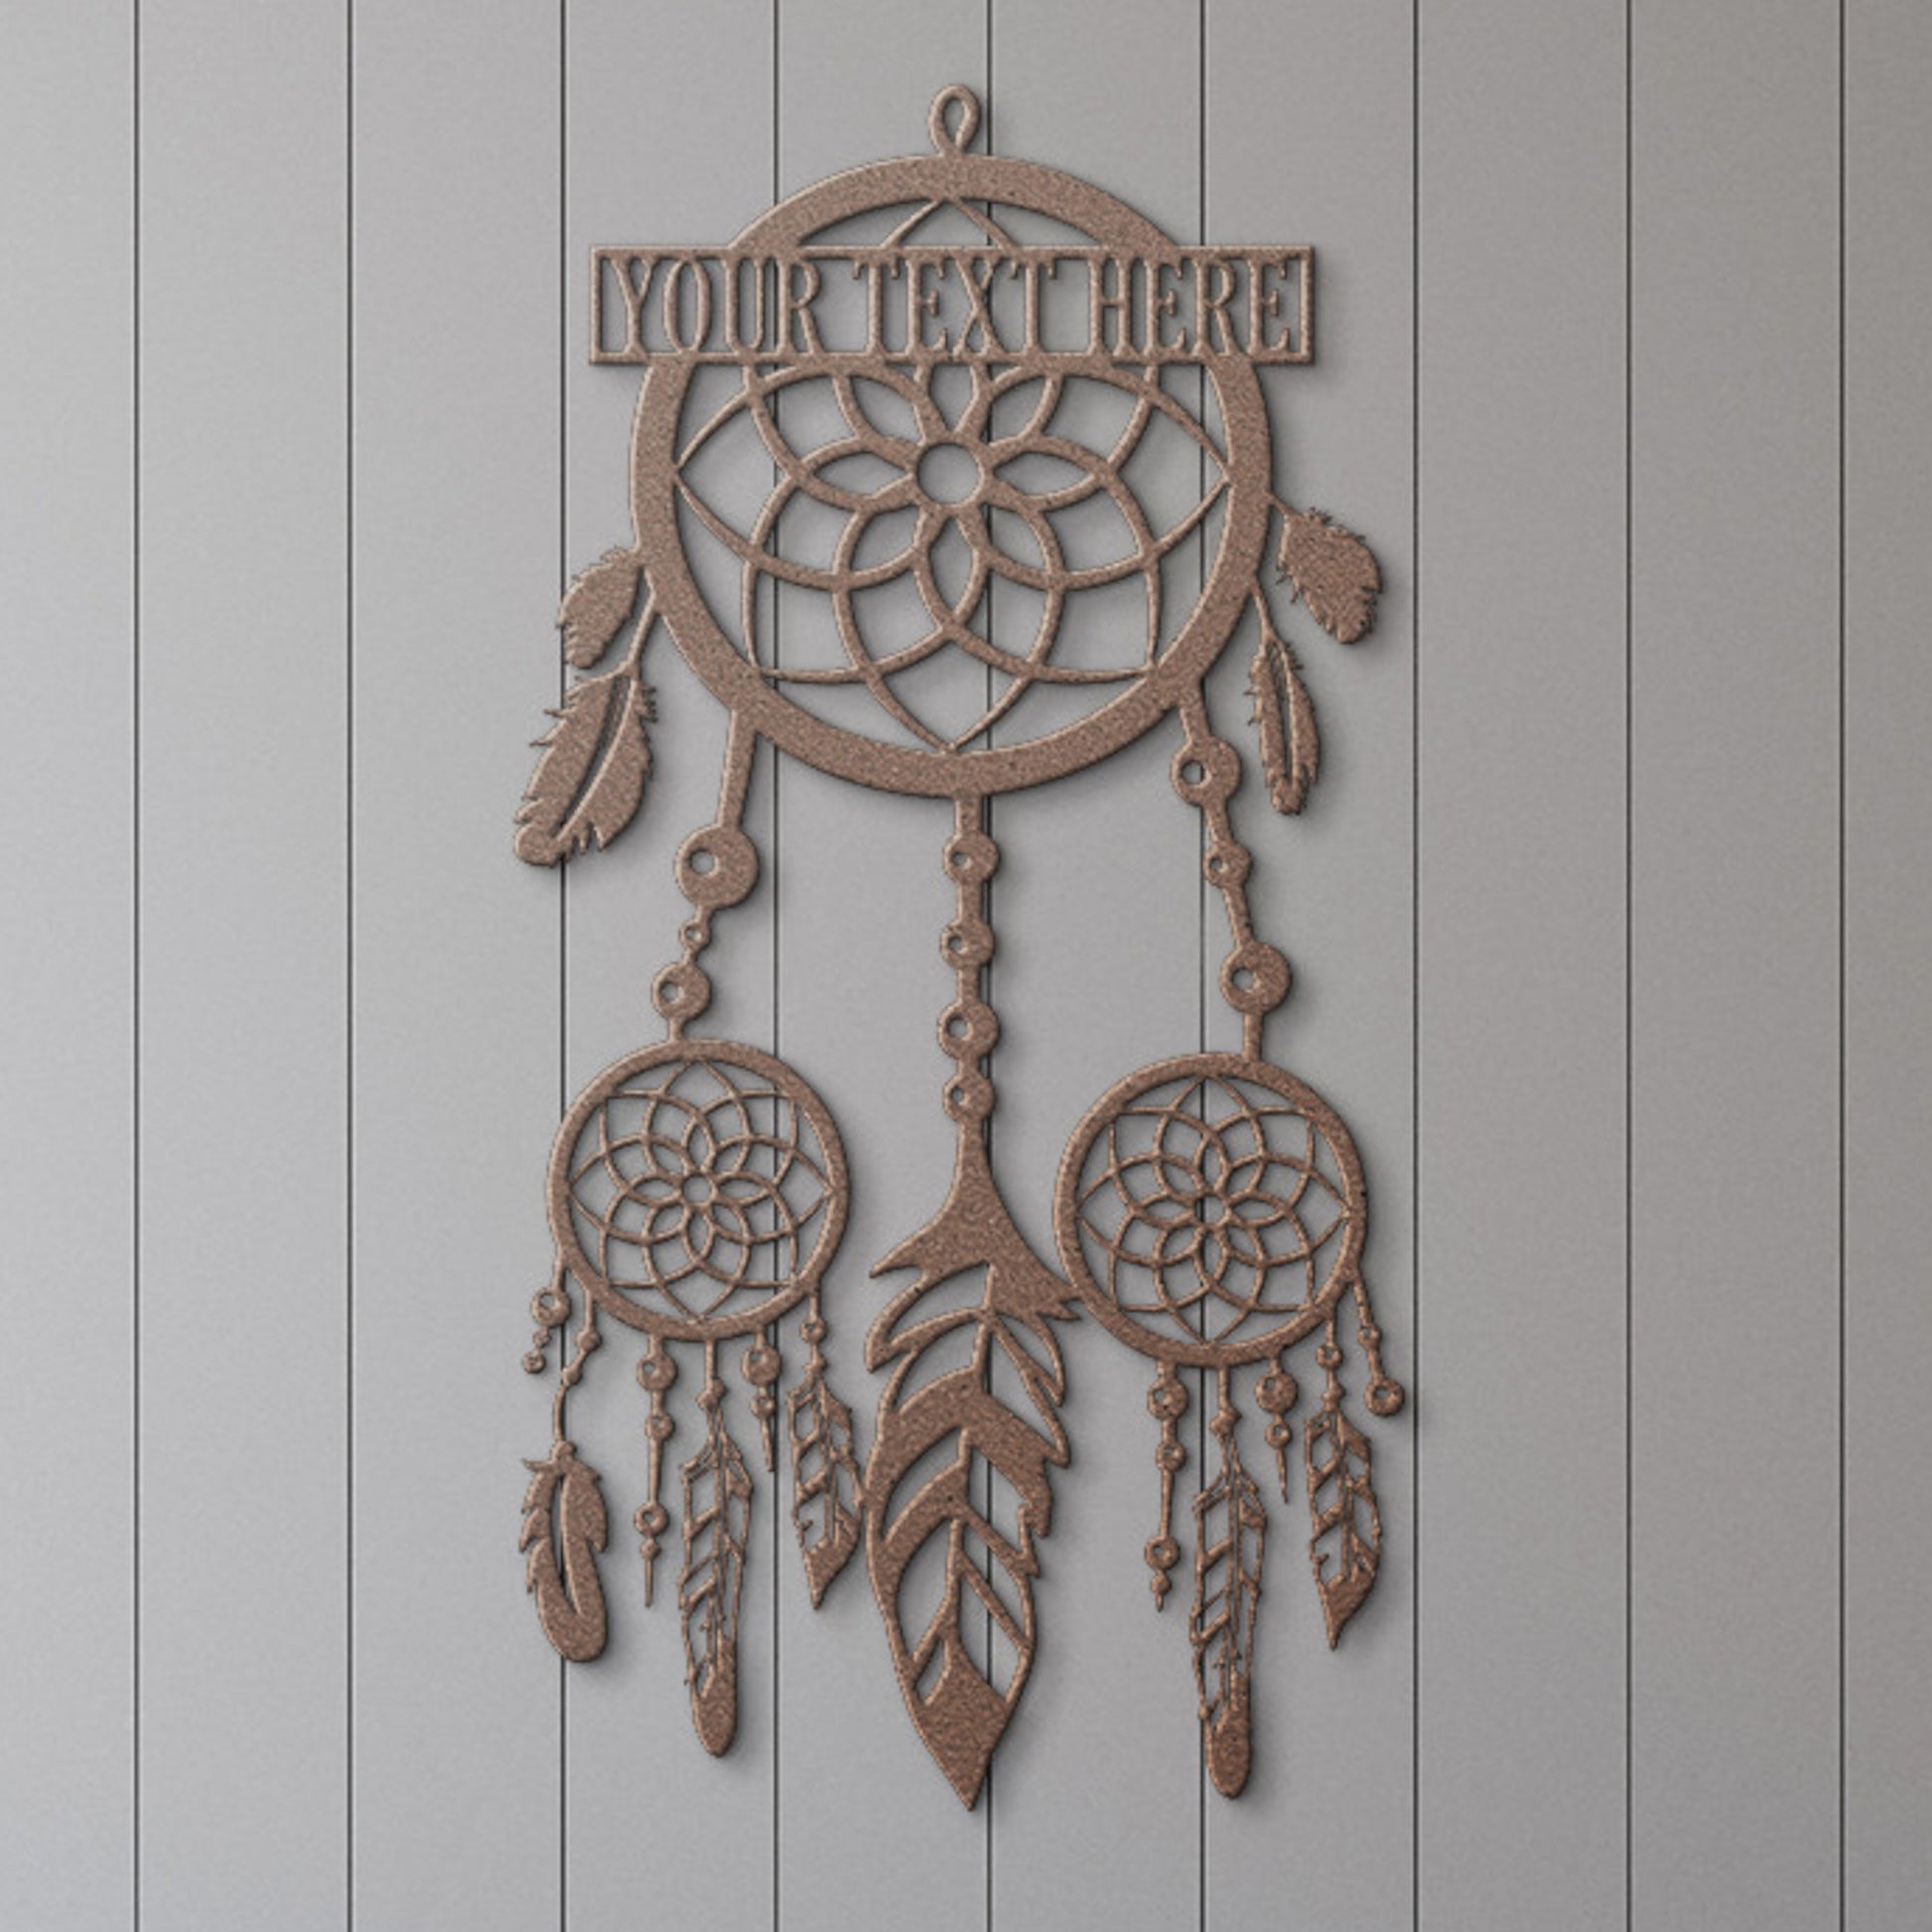 Personalized Dreamcatcher Name Metal Sign Gifts. Custom Dreamcatcher Wall Decor. Monogram Gift. Bedroom Wall Hanging. Nightmare Protection